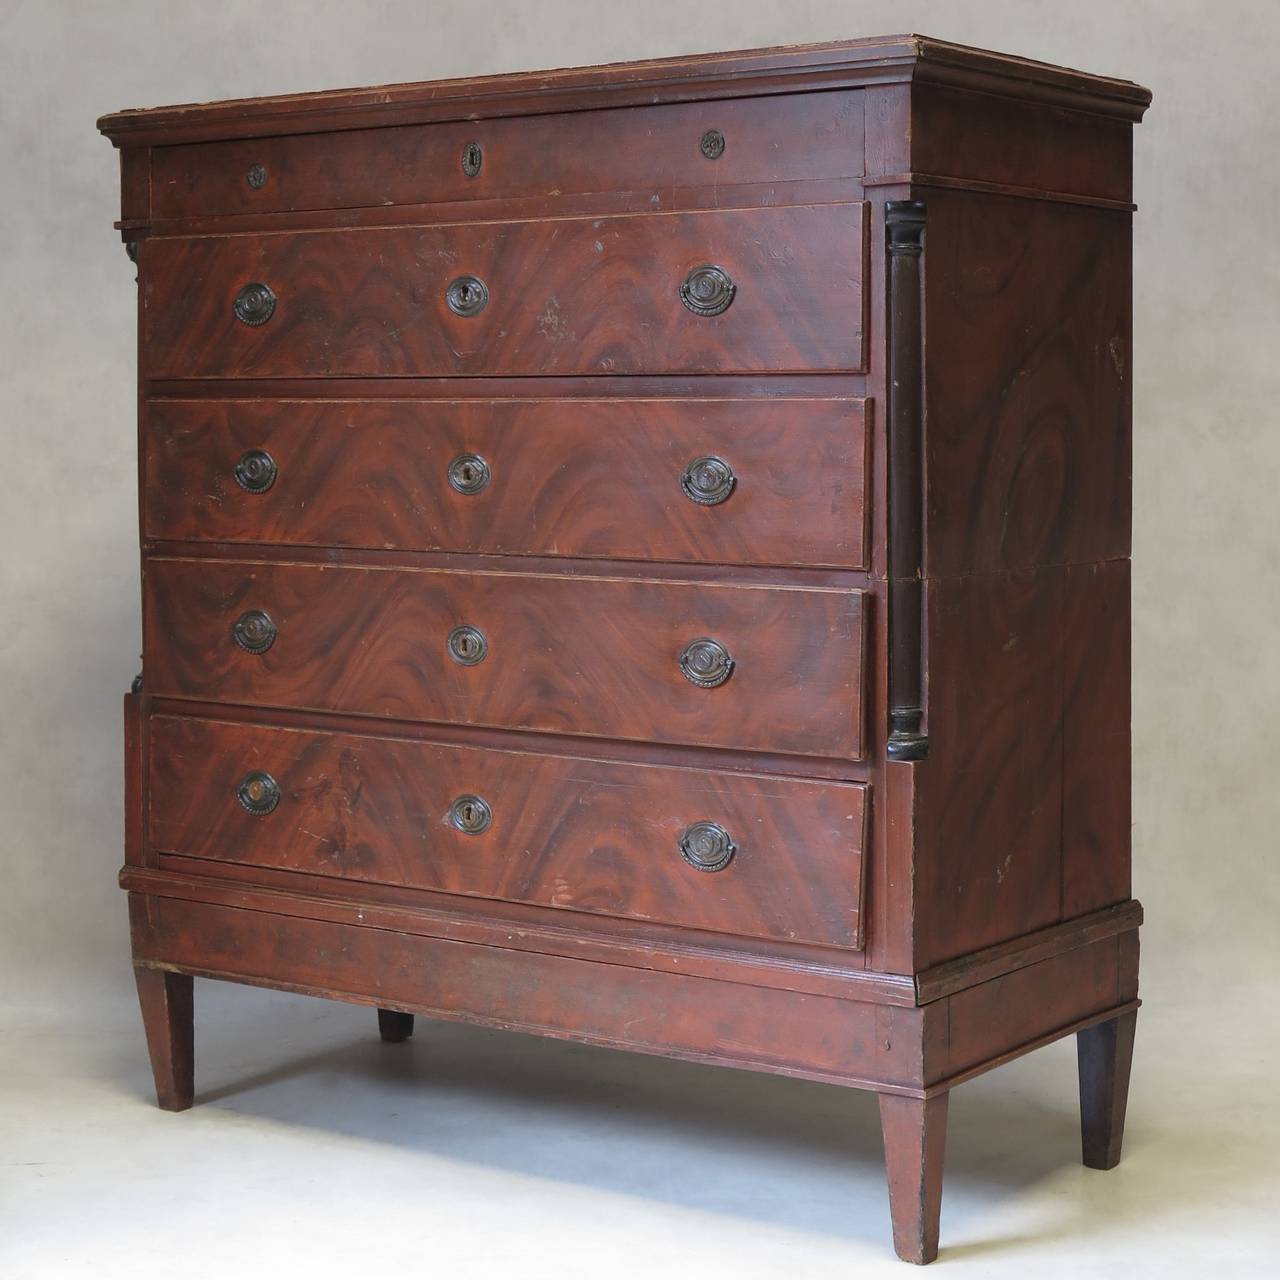 Tall French Empire-style commode. The pine wood is painted in a faux-bois trompe l'oeil imitating mahogany. Wood columns on either side are painted a darker color. 
The chest is in two parts (top and bottom). The divide can be seen from the side